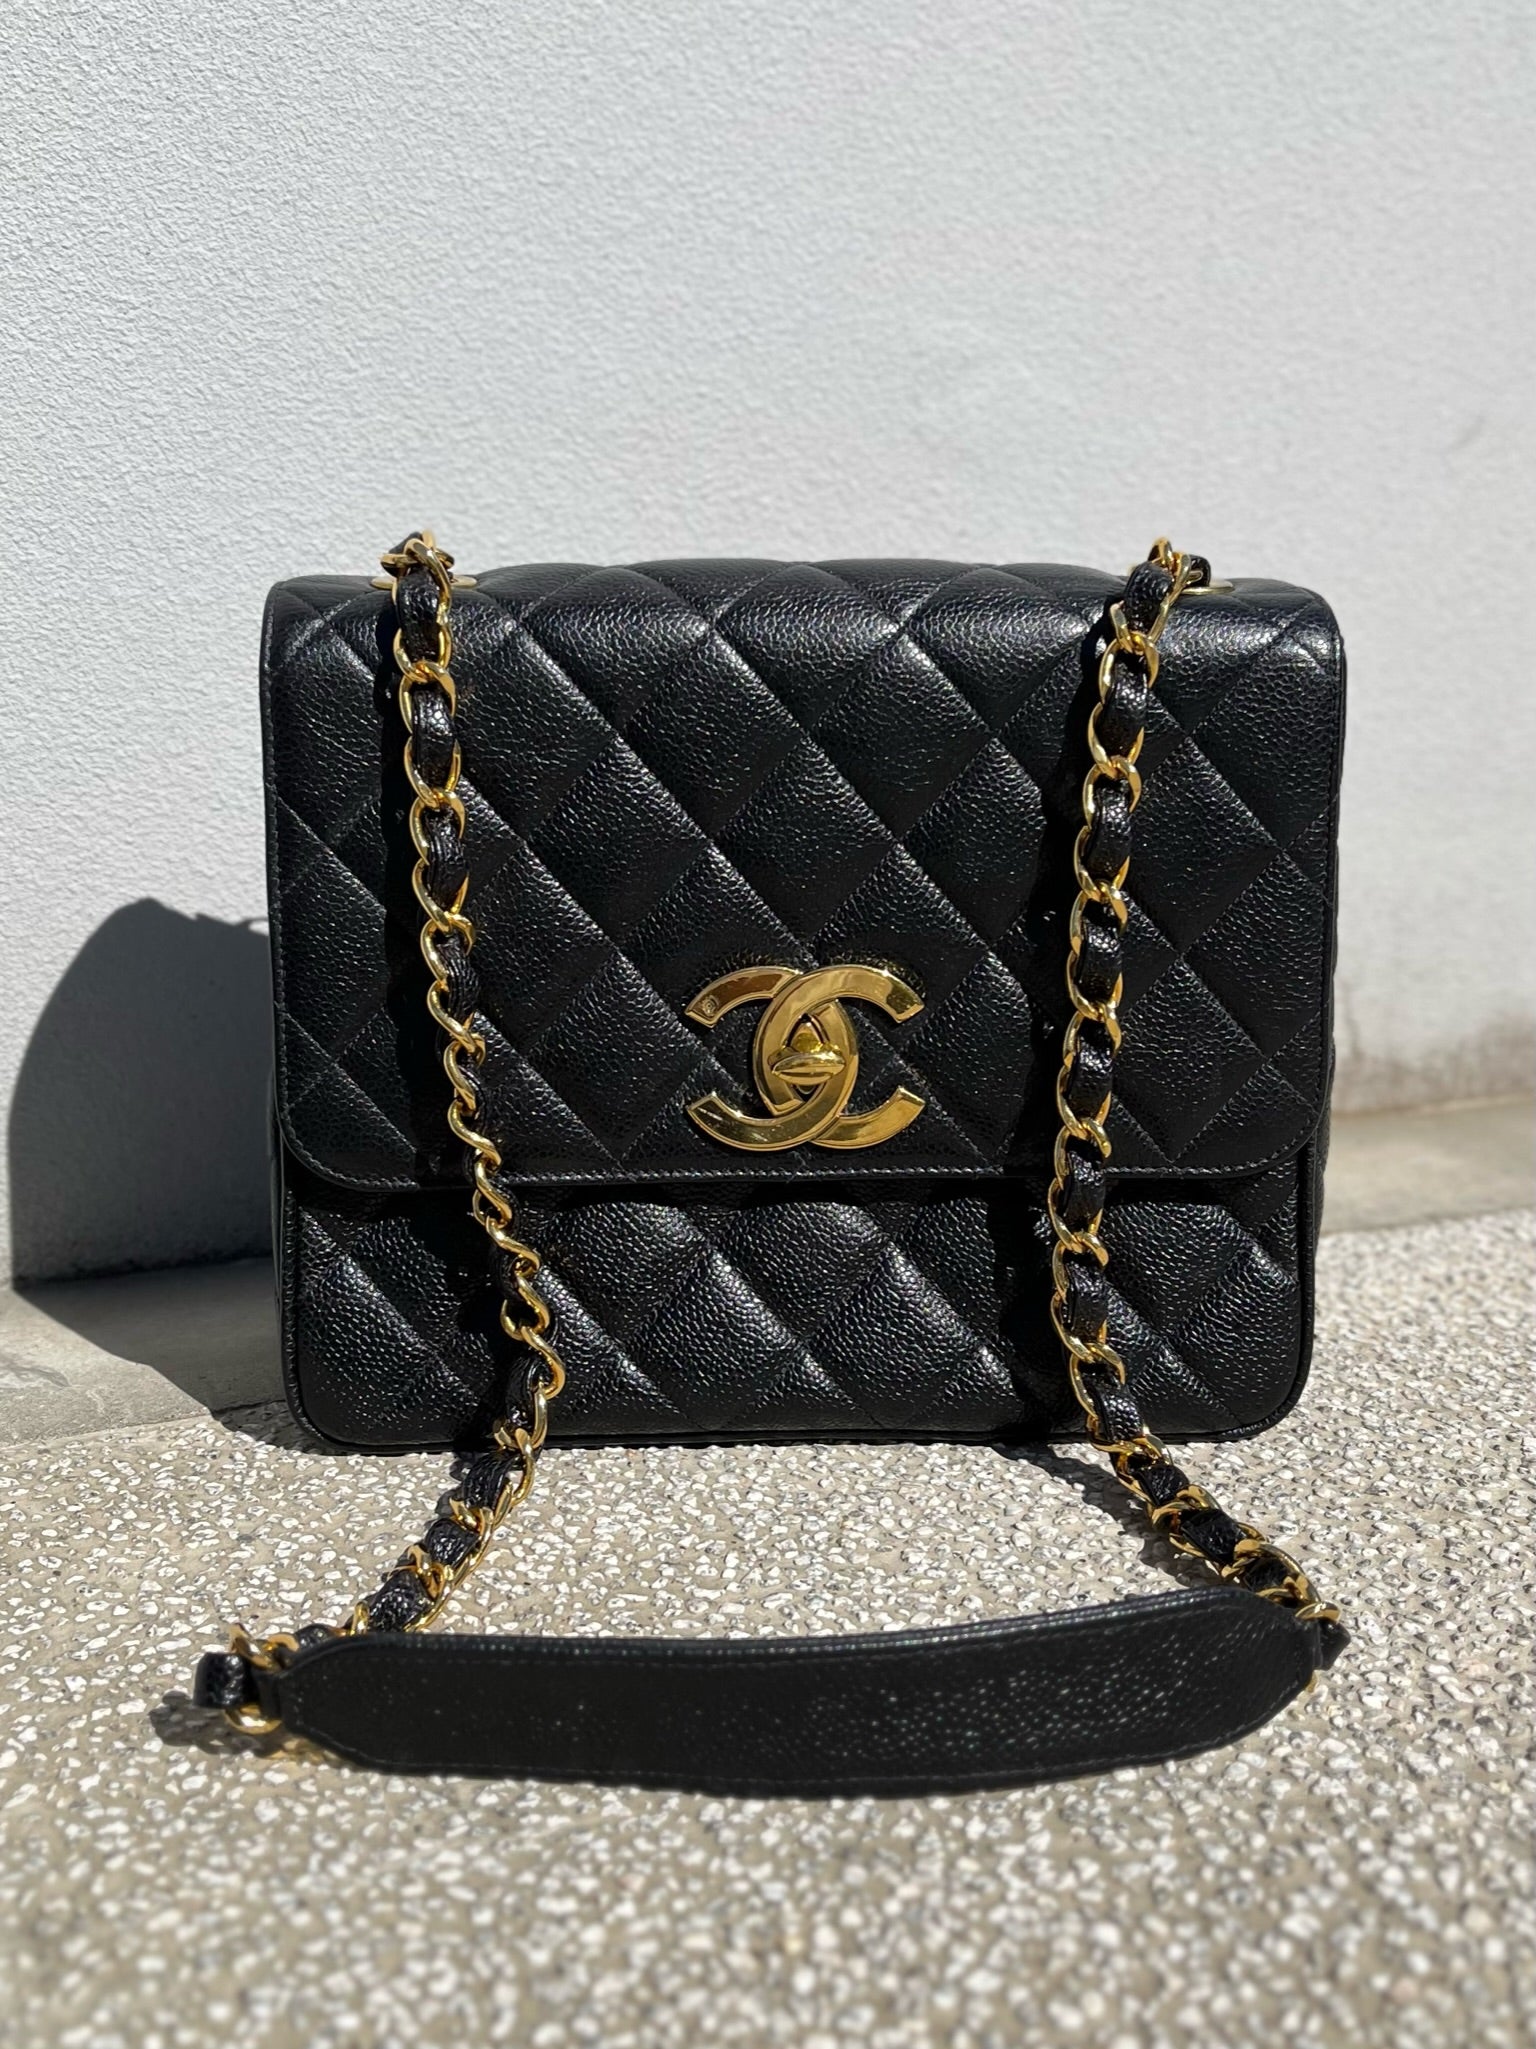 Chanel vintage bags